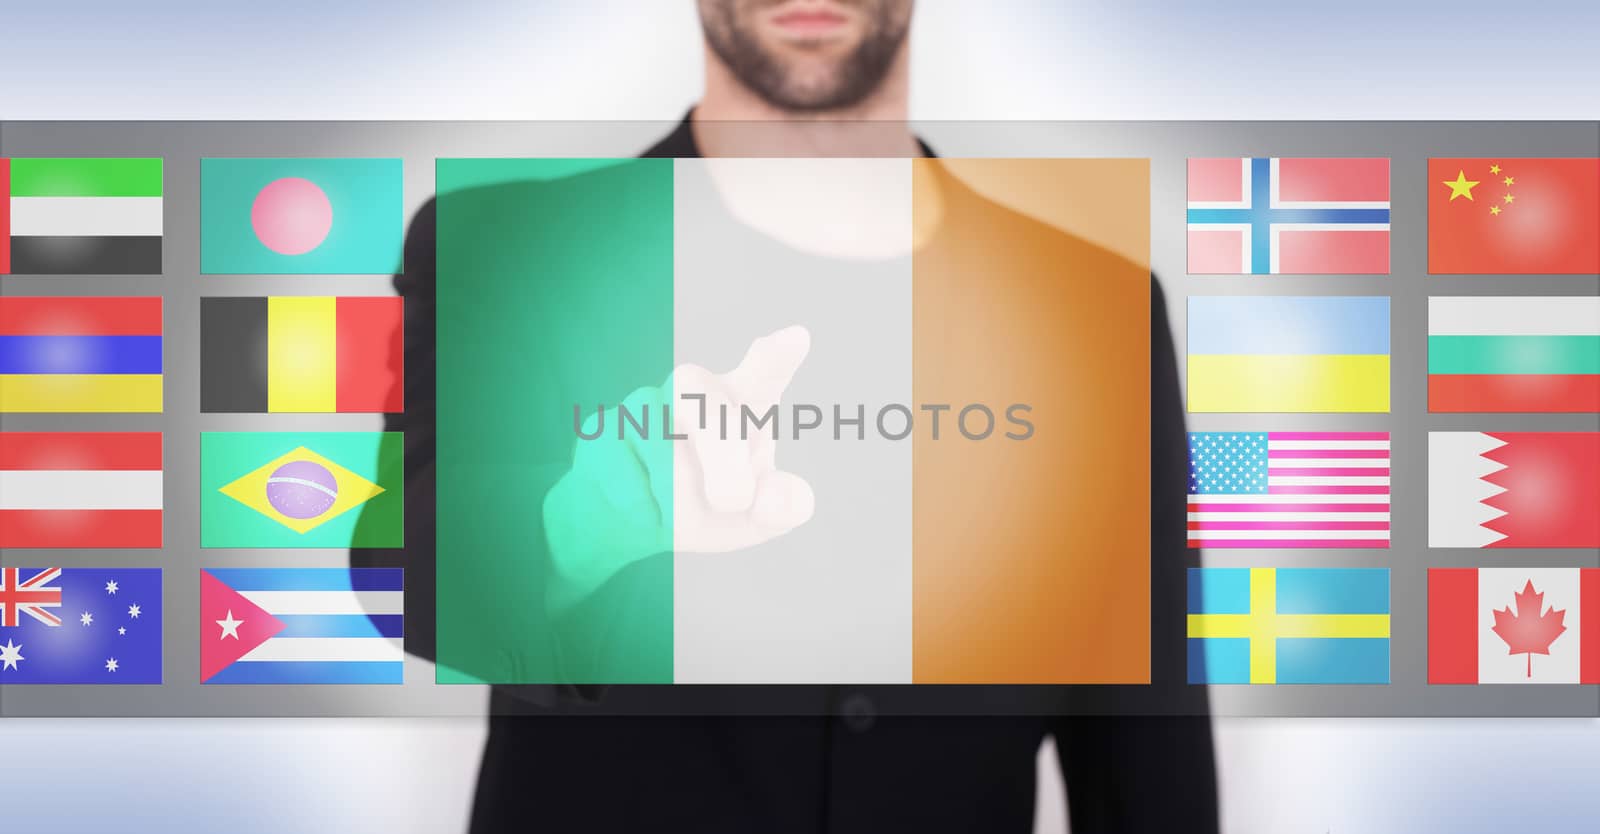 Hand pushing on a touch screen interface, choosing language or country, Ireland